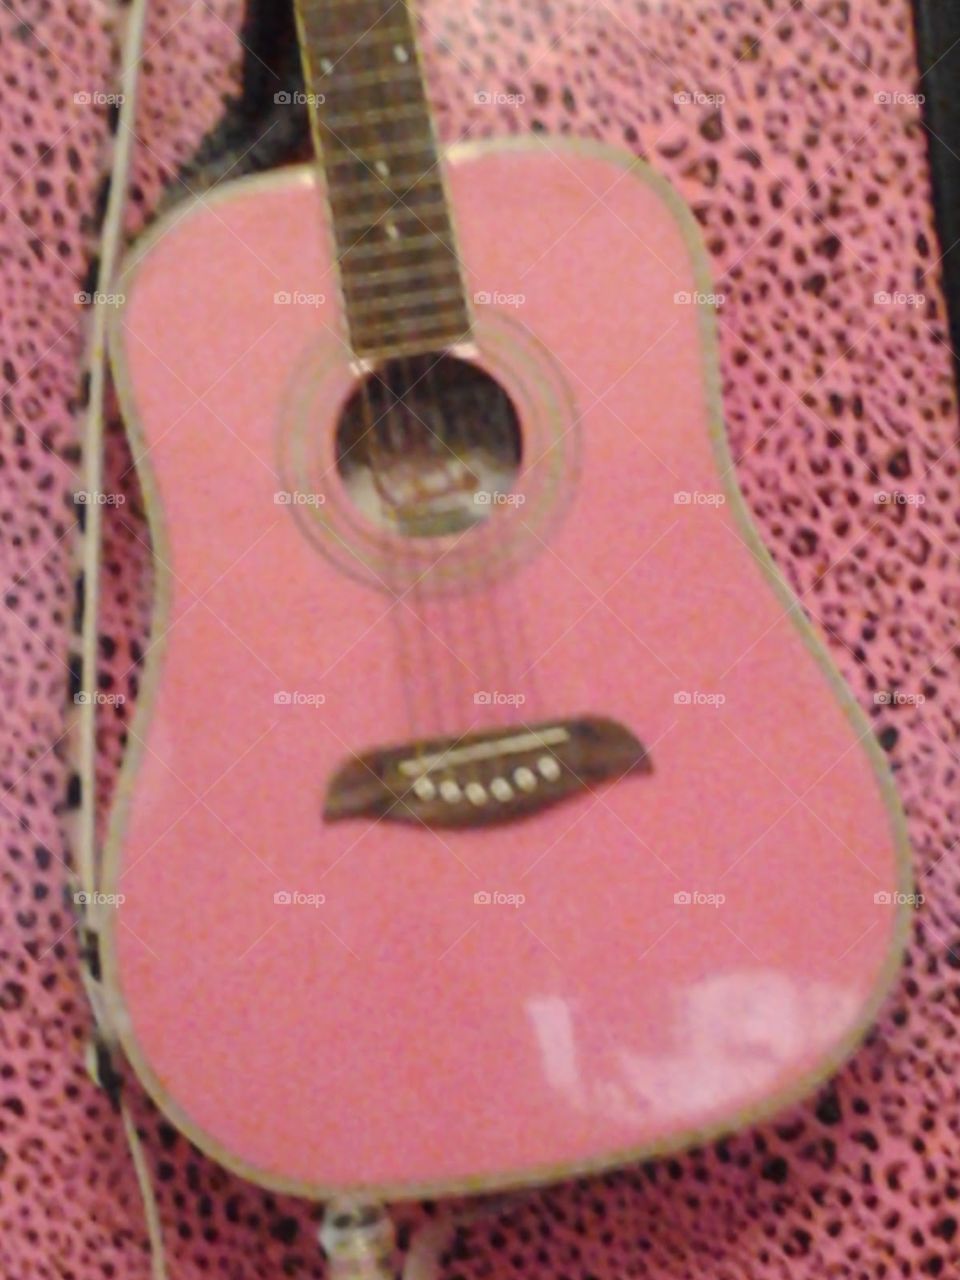 my guitar. my pink guitar on my pink leopard wall 